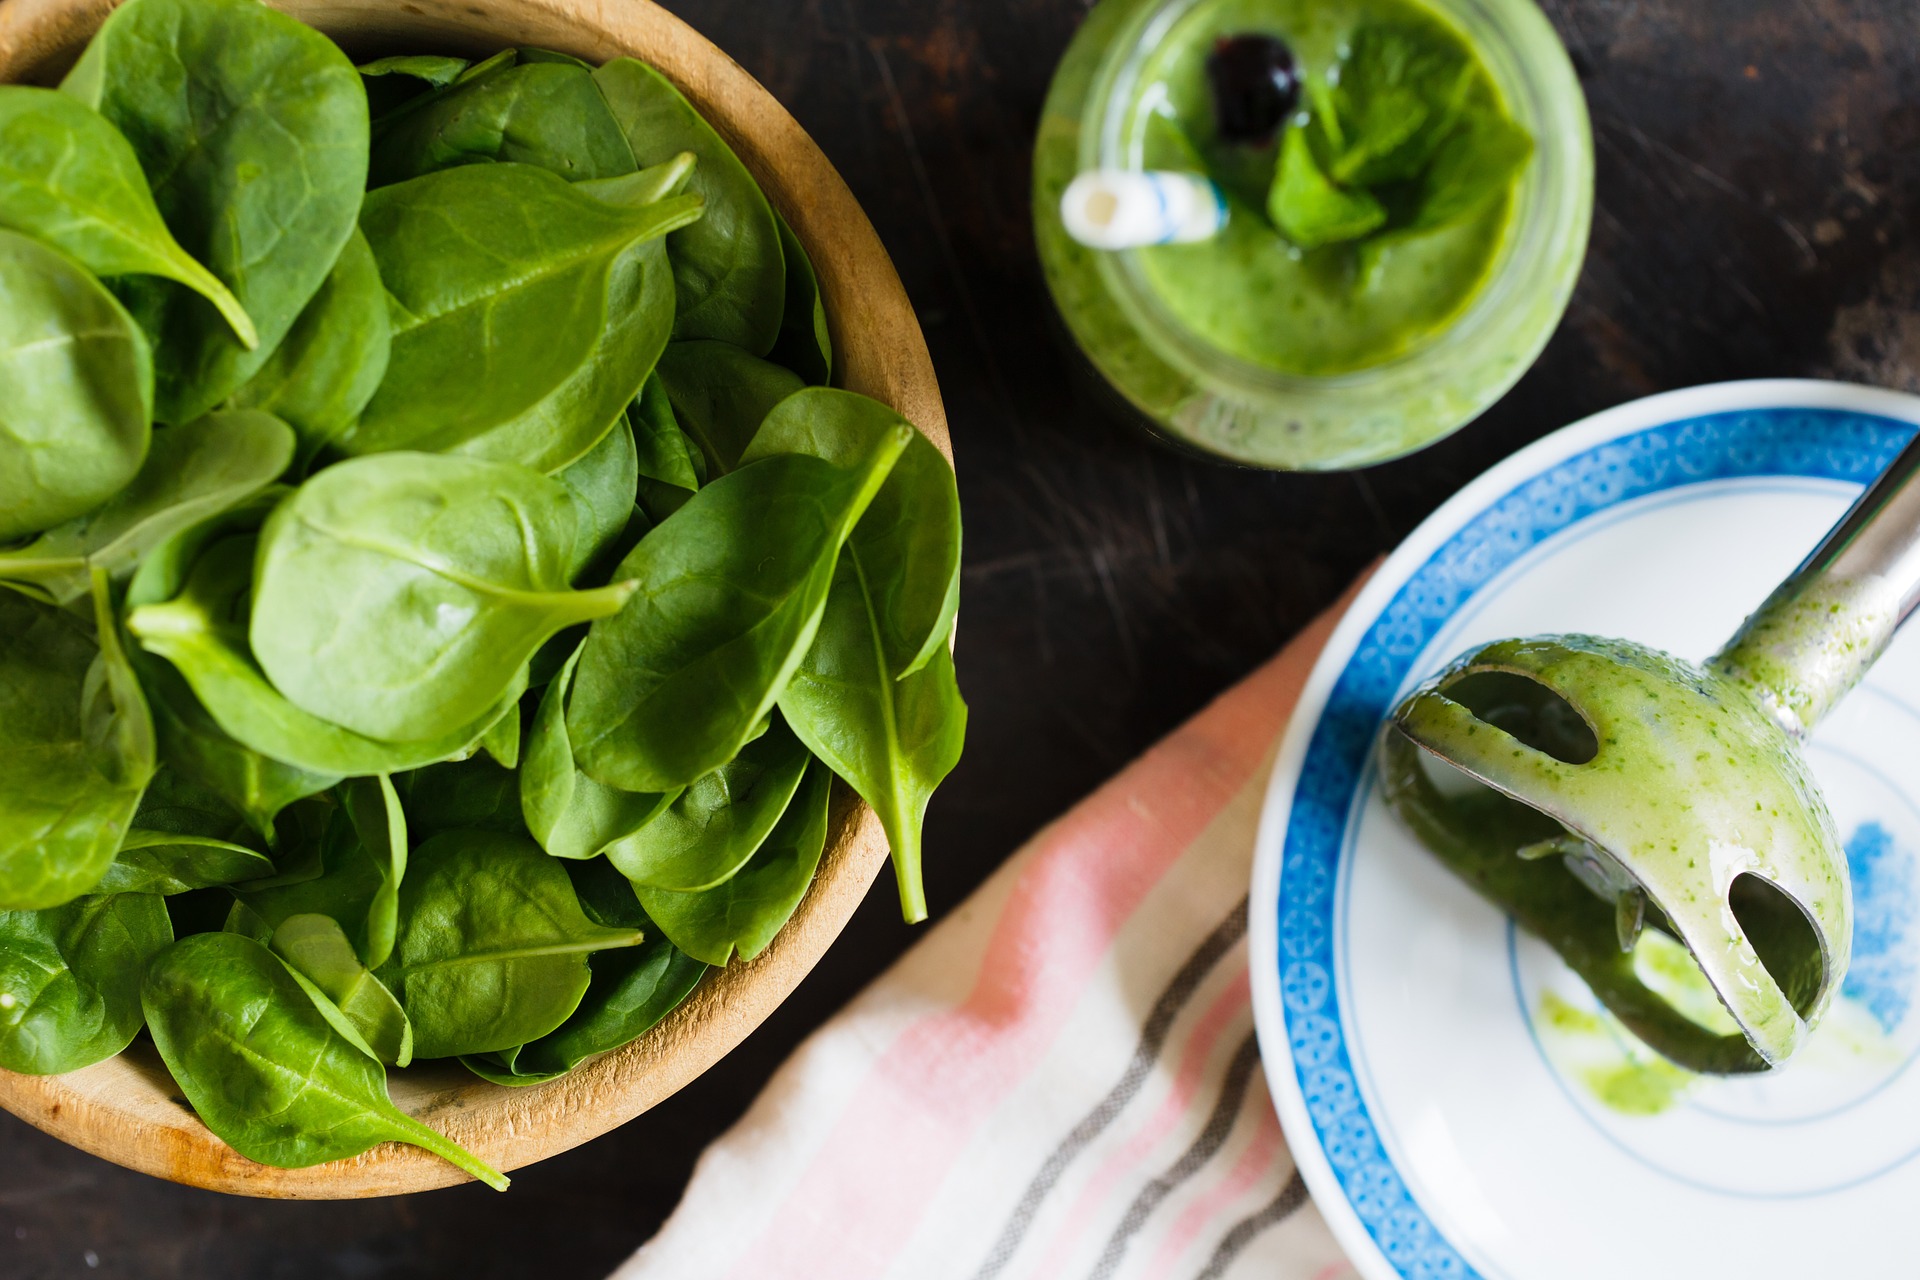 Increase muscle strength by consuming spinach